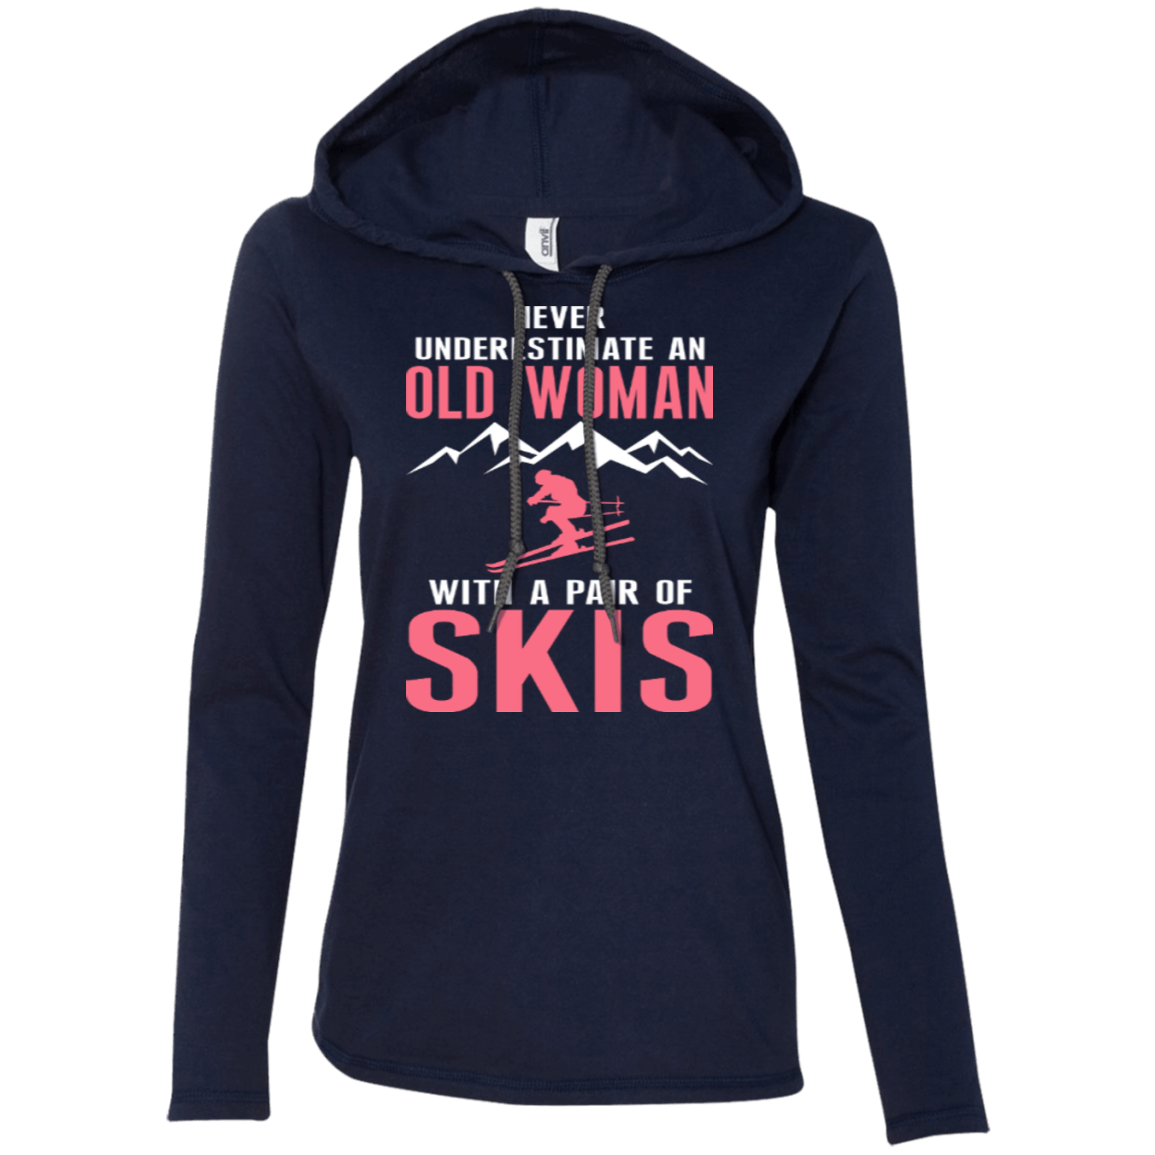 Never Underestimate An Old Woman With A Pair Of Skis Hoodies - Powderaddicts